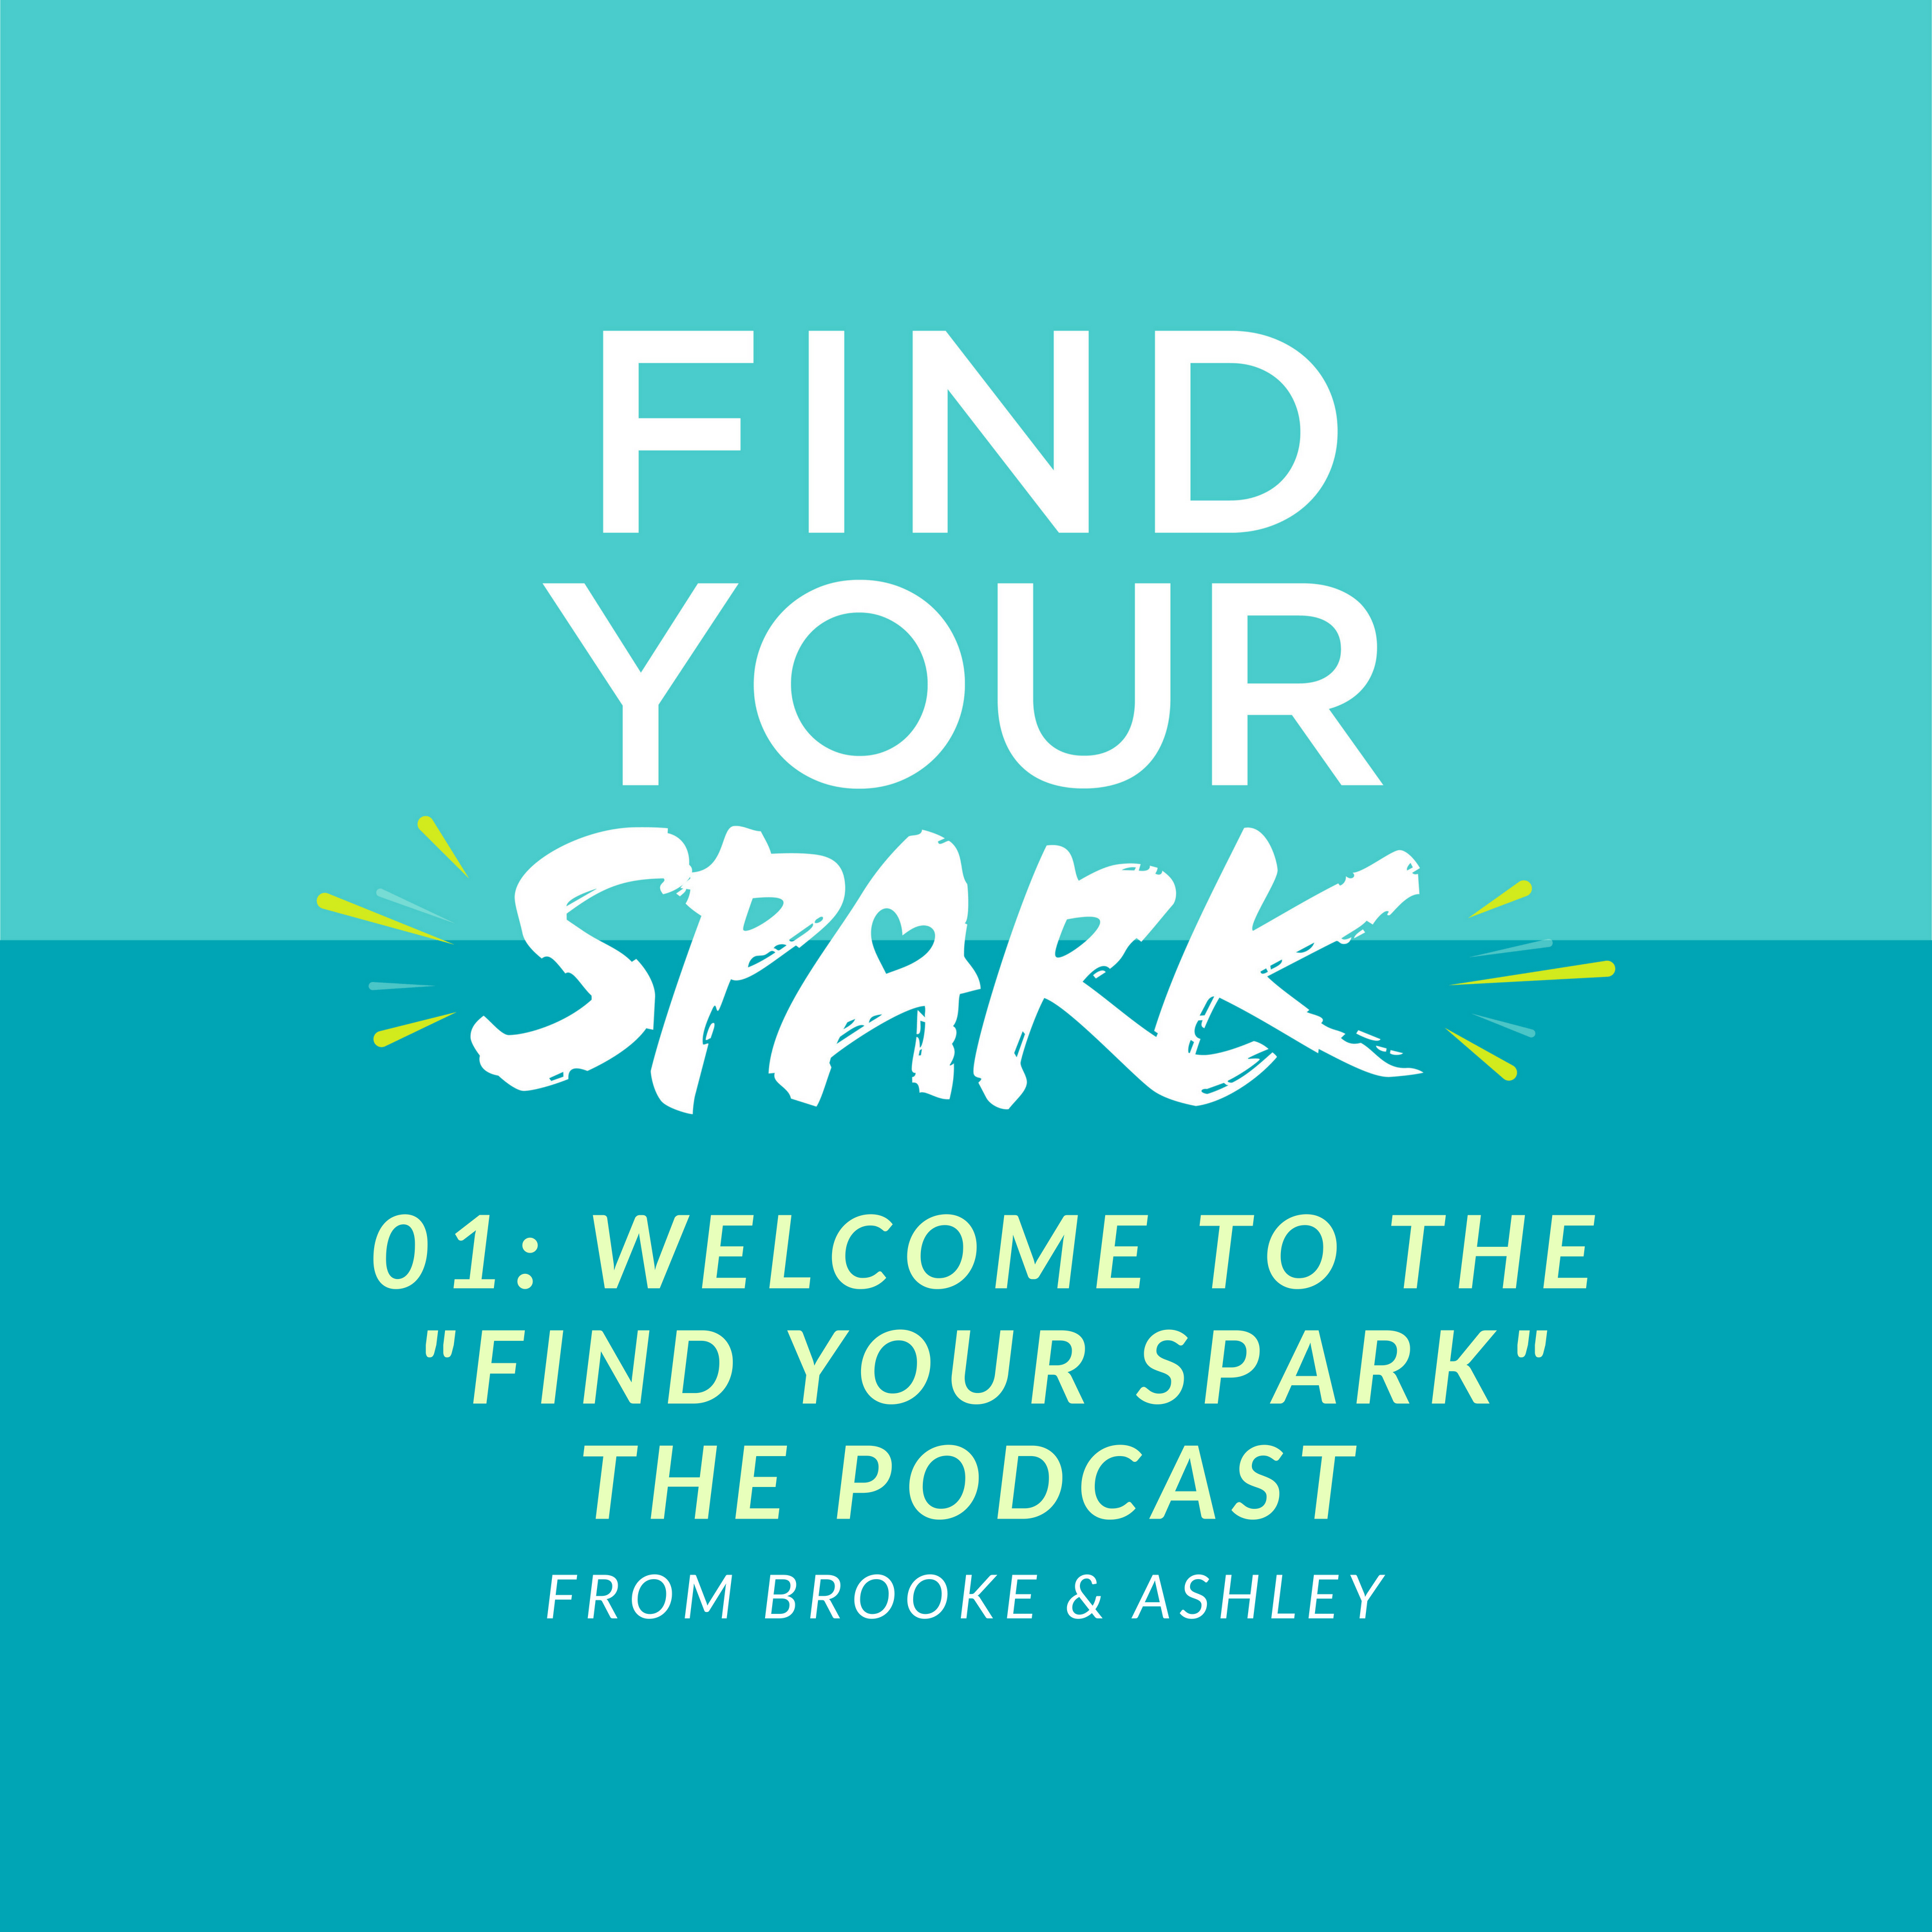 01: Welcome to Find Your Spark - The Podcast